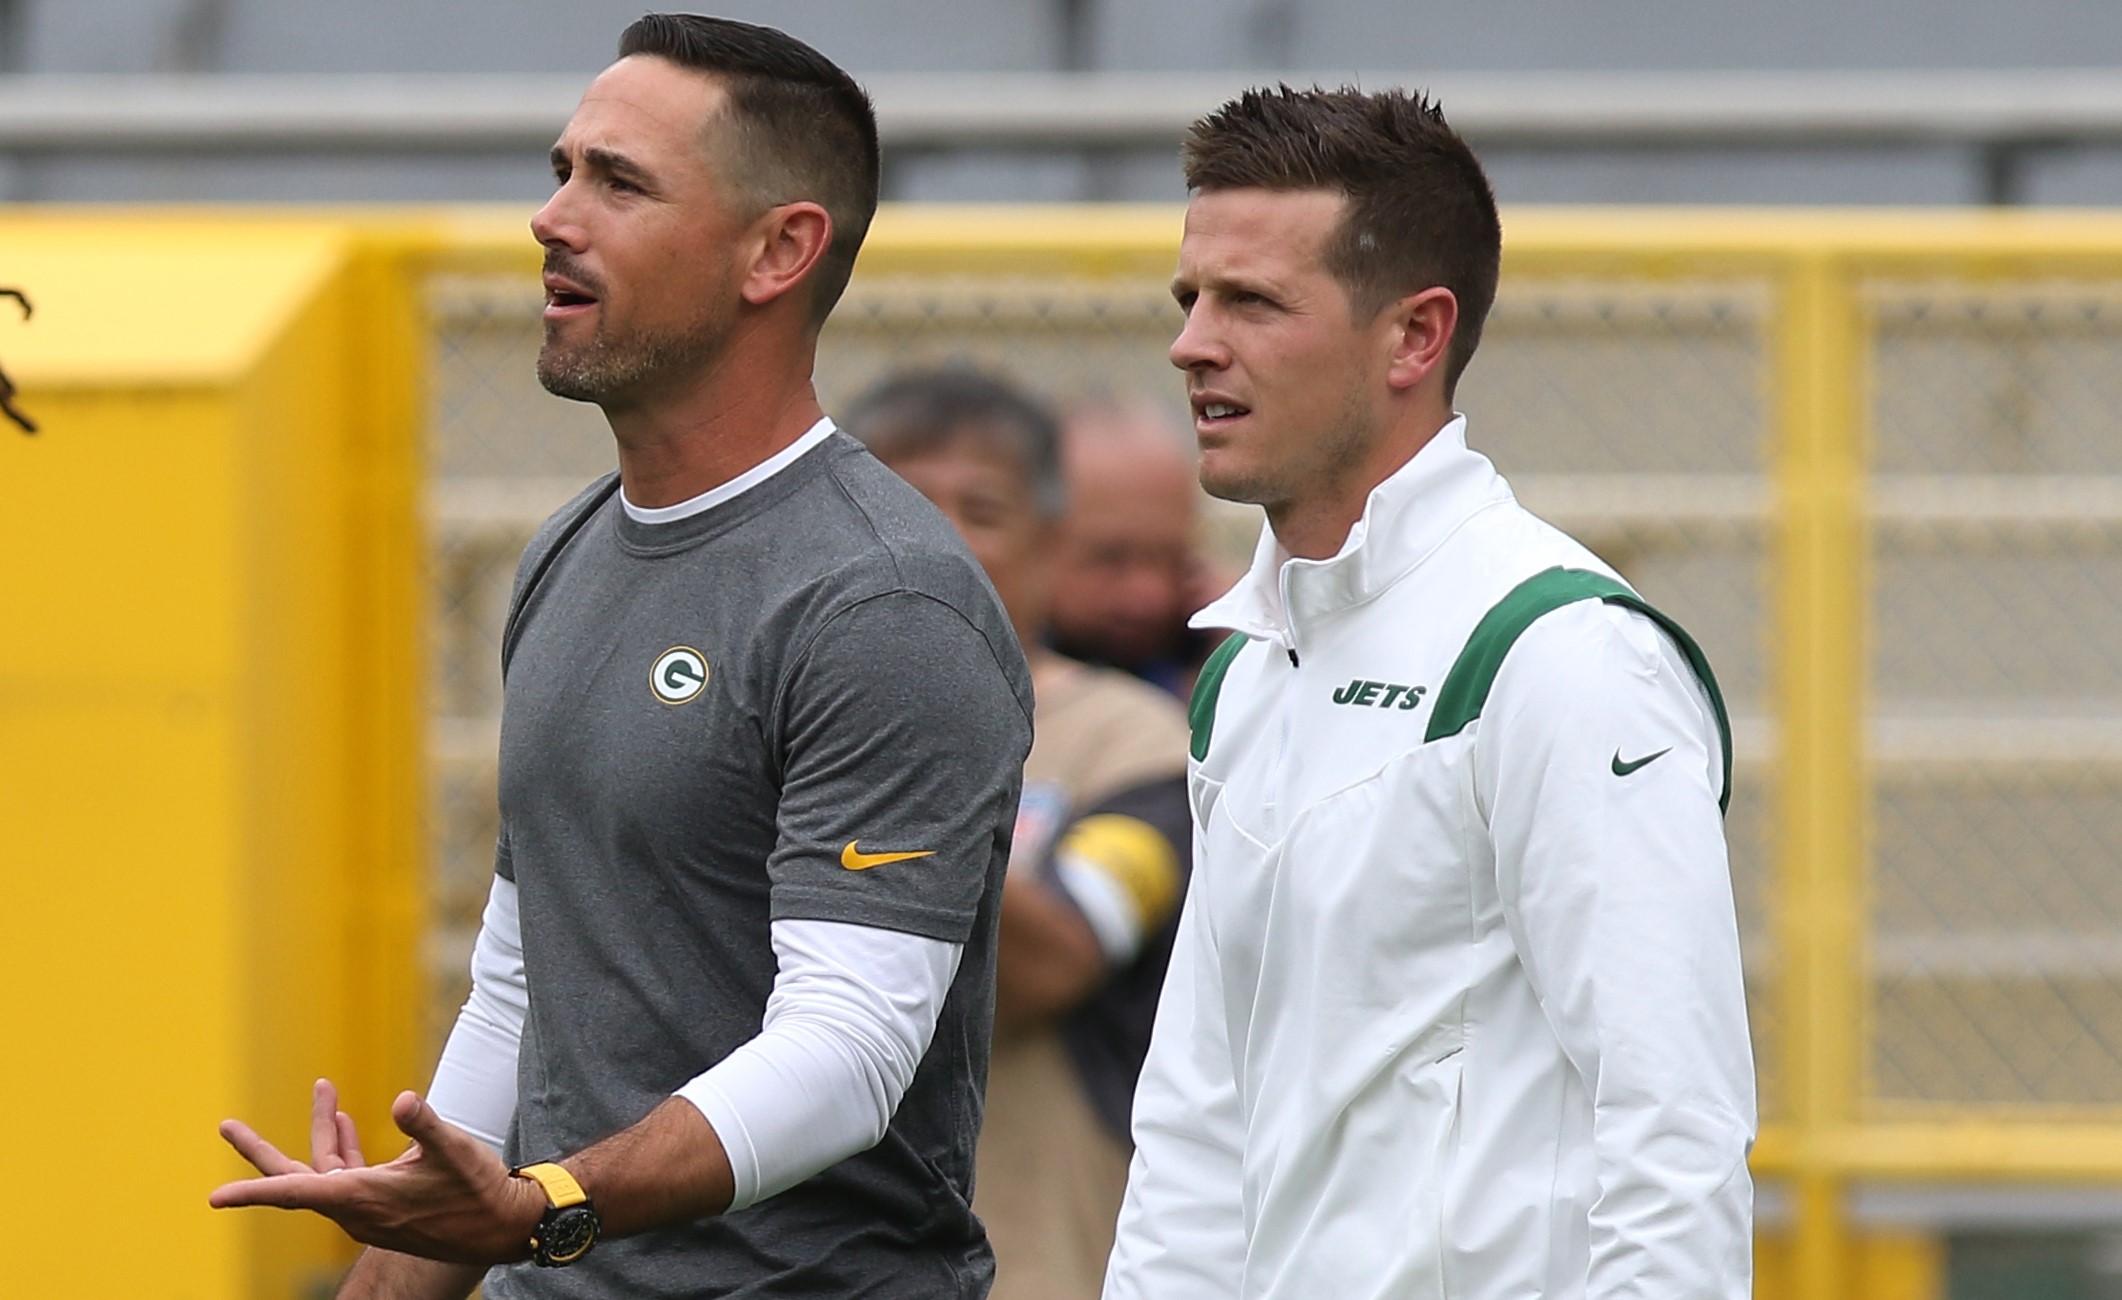 Green Bay Packers head coach Matt LaFleur walks out with his brother New York Jets offensive coordinator Mike LaFleur.